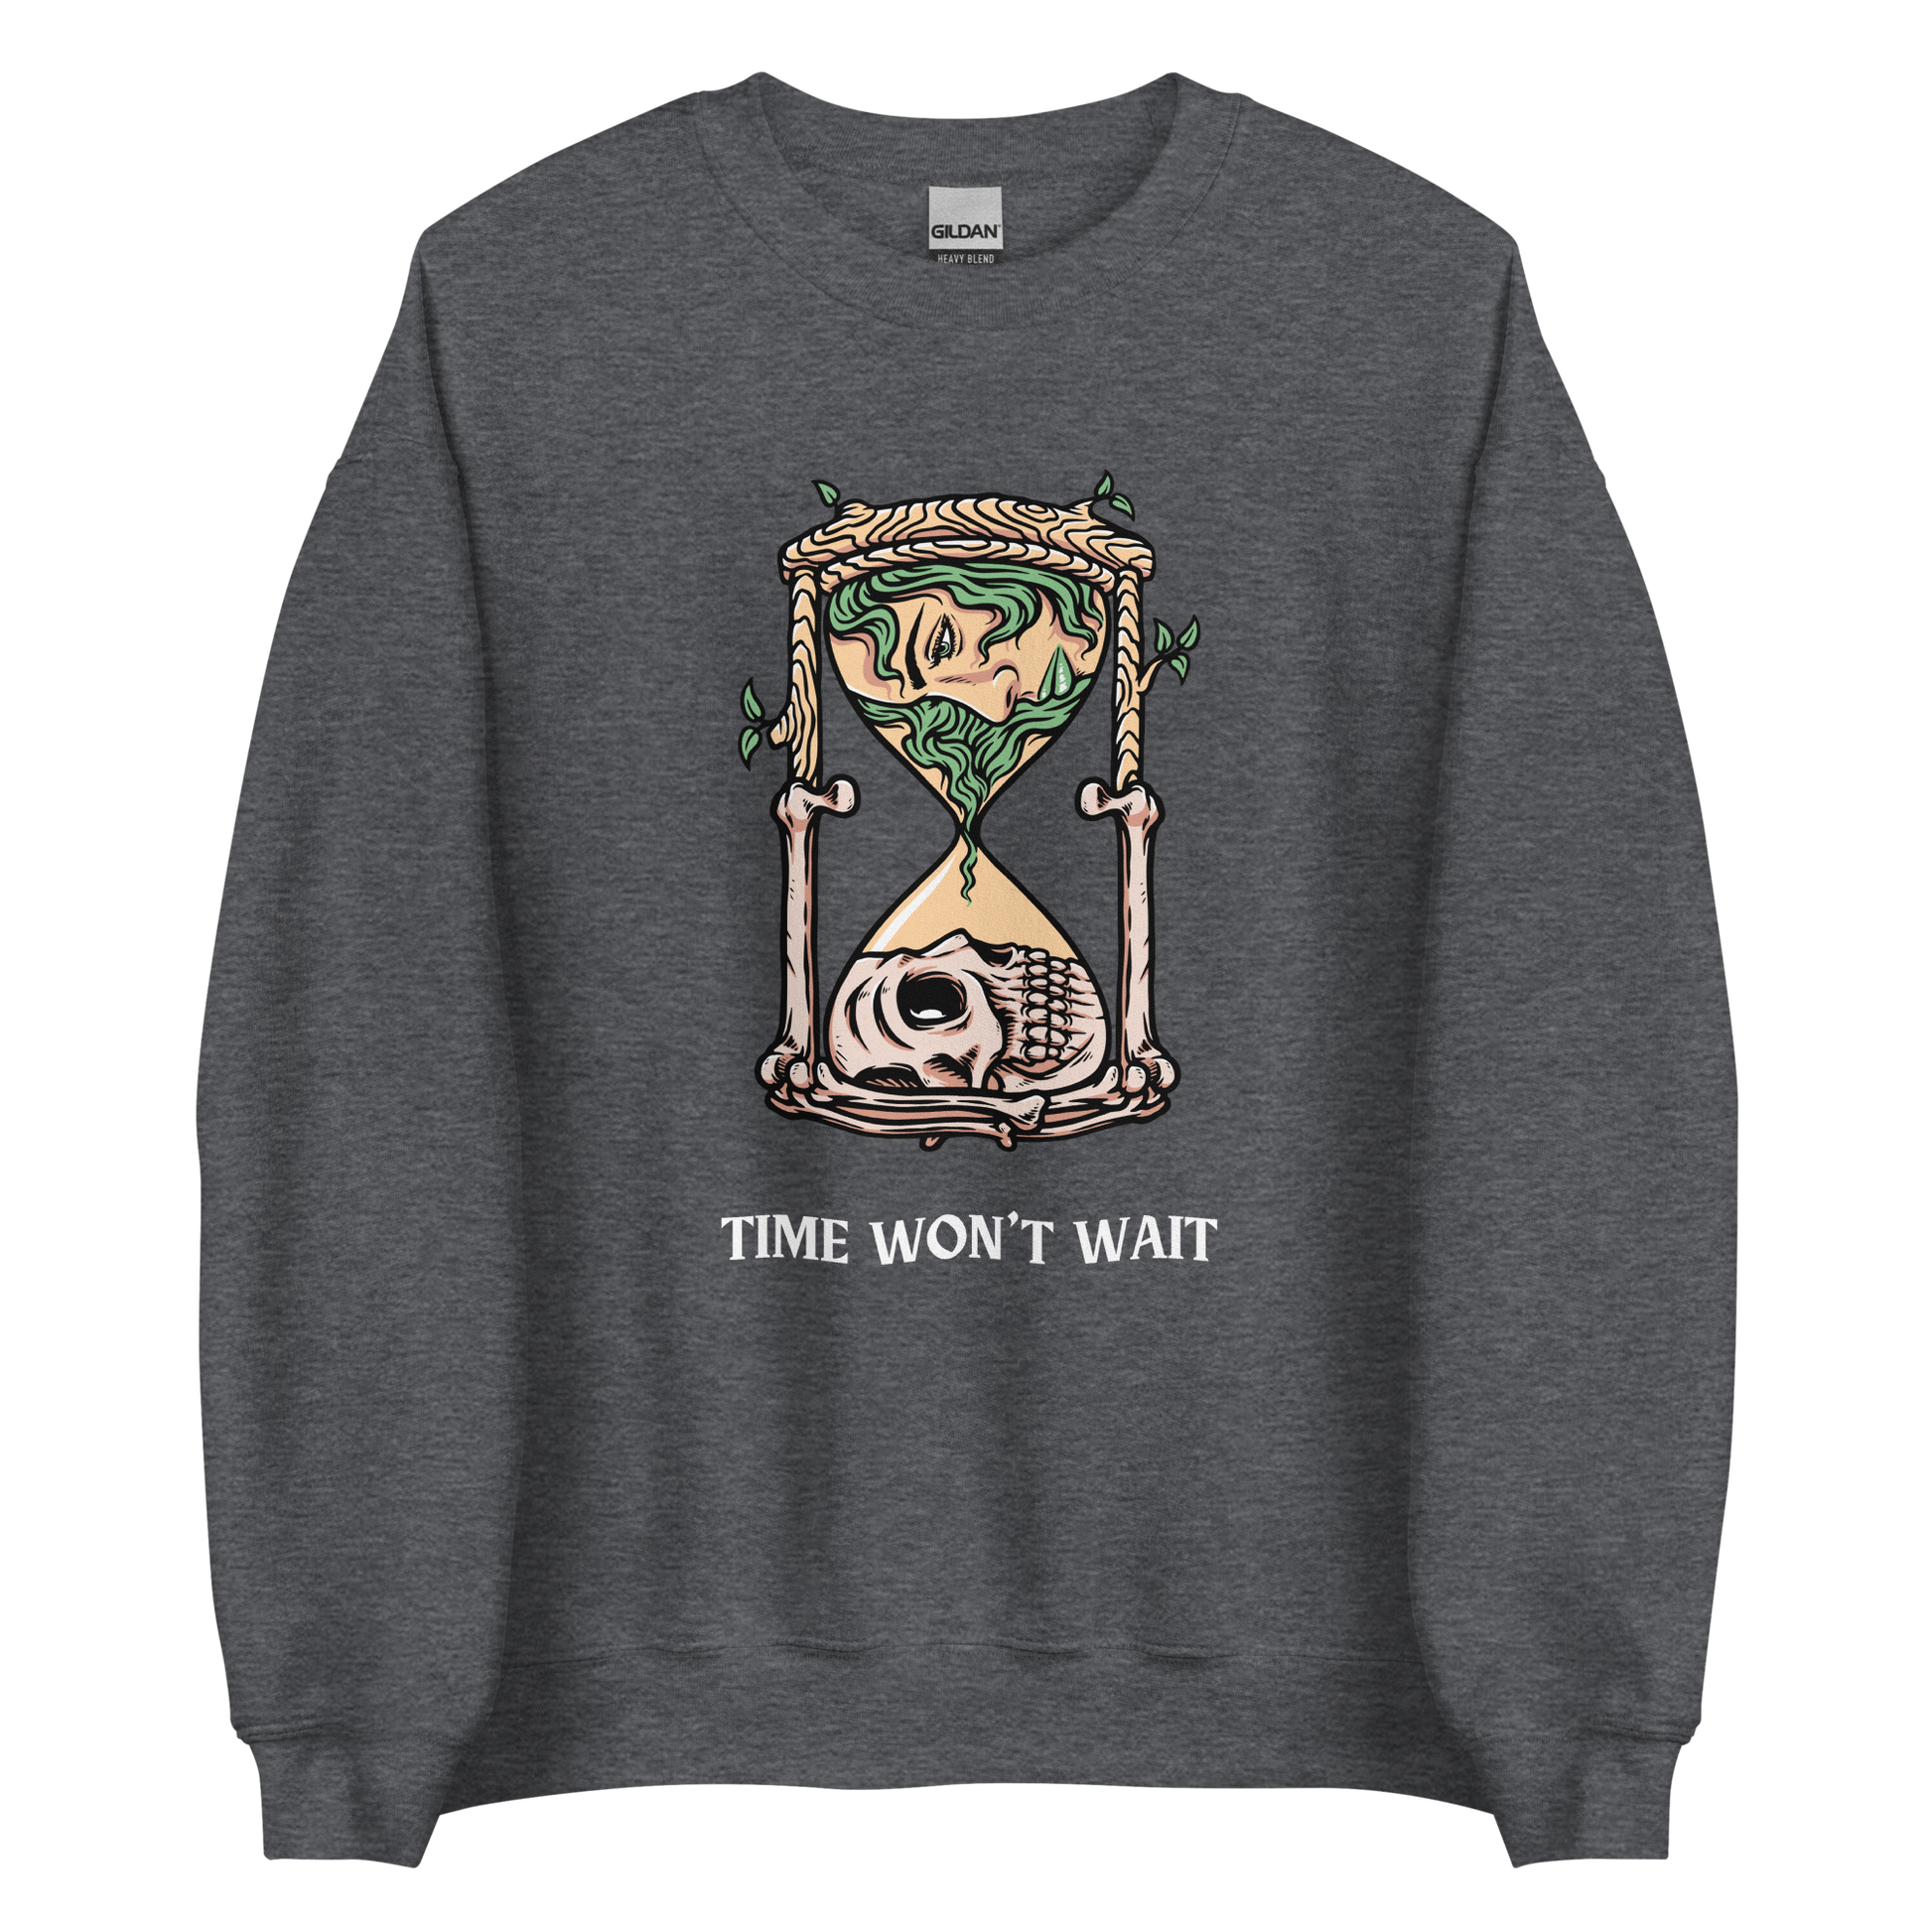 Dark Heather Hourglass Sweatshirt featuring a captivating Time Won't Wait graphic on the chest - Cool Graphic Hourglass Sweatshirts - Boozy Fox